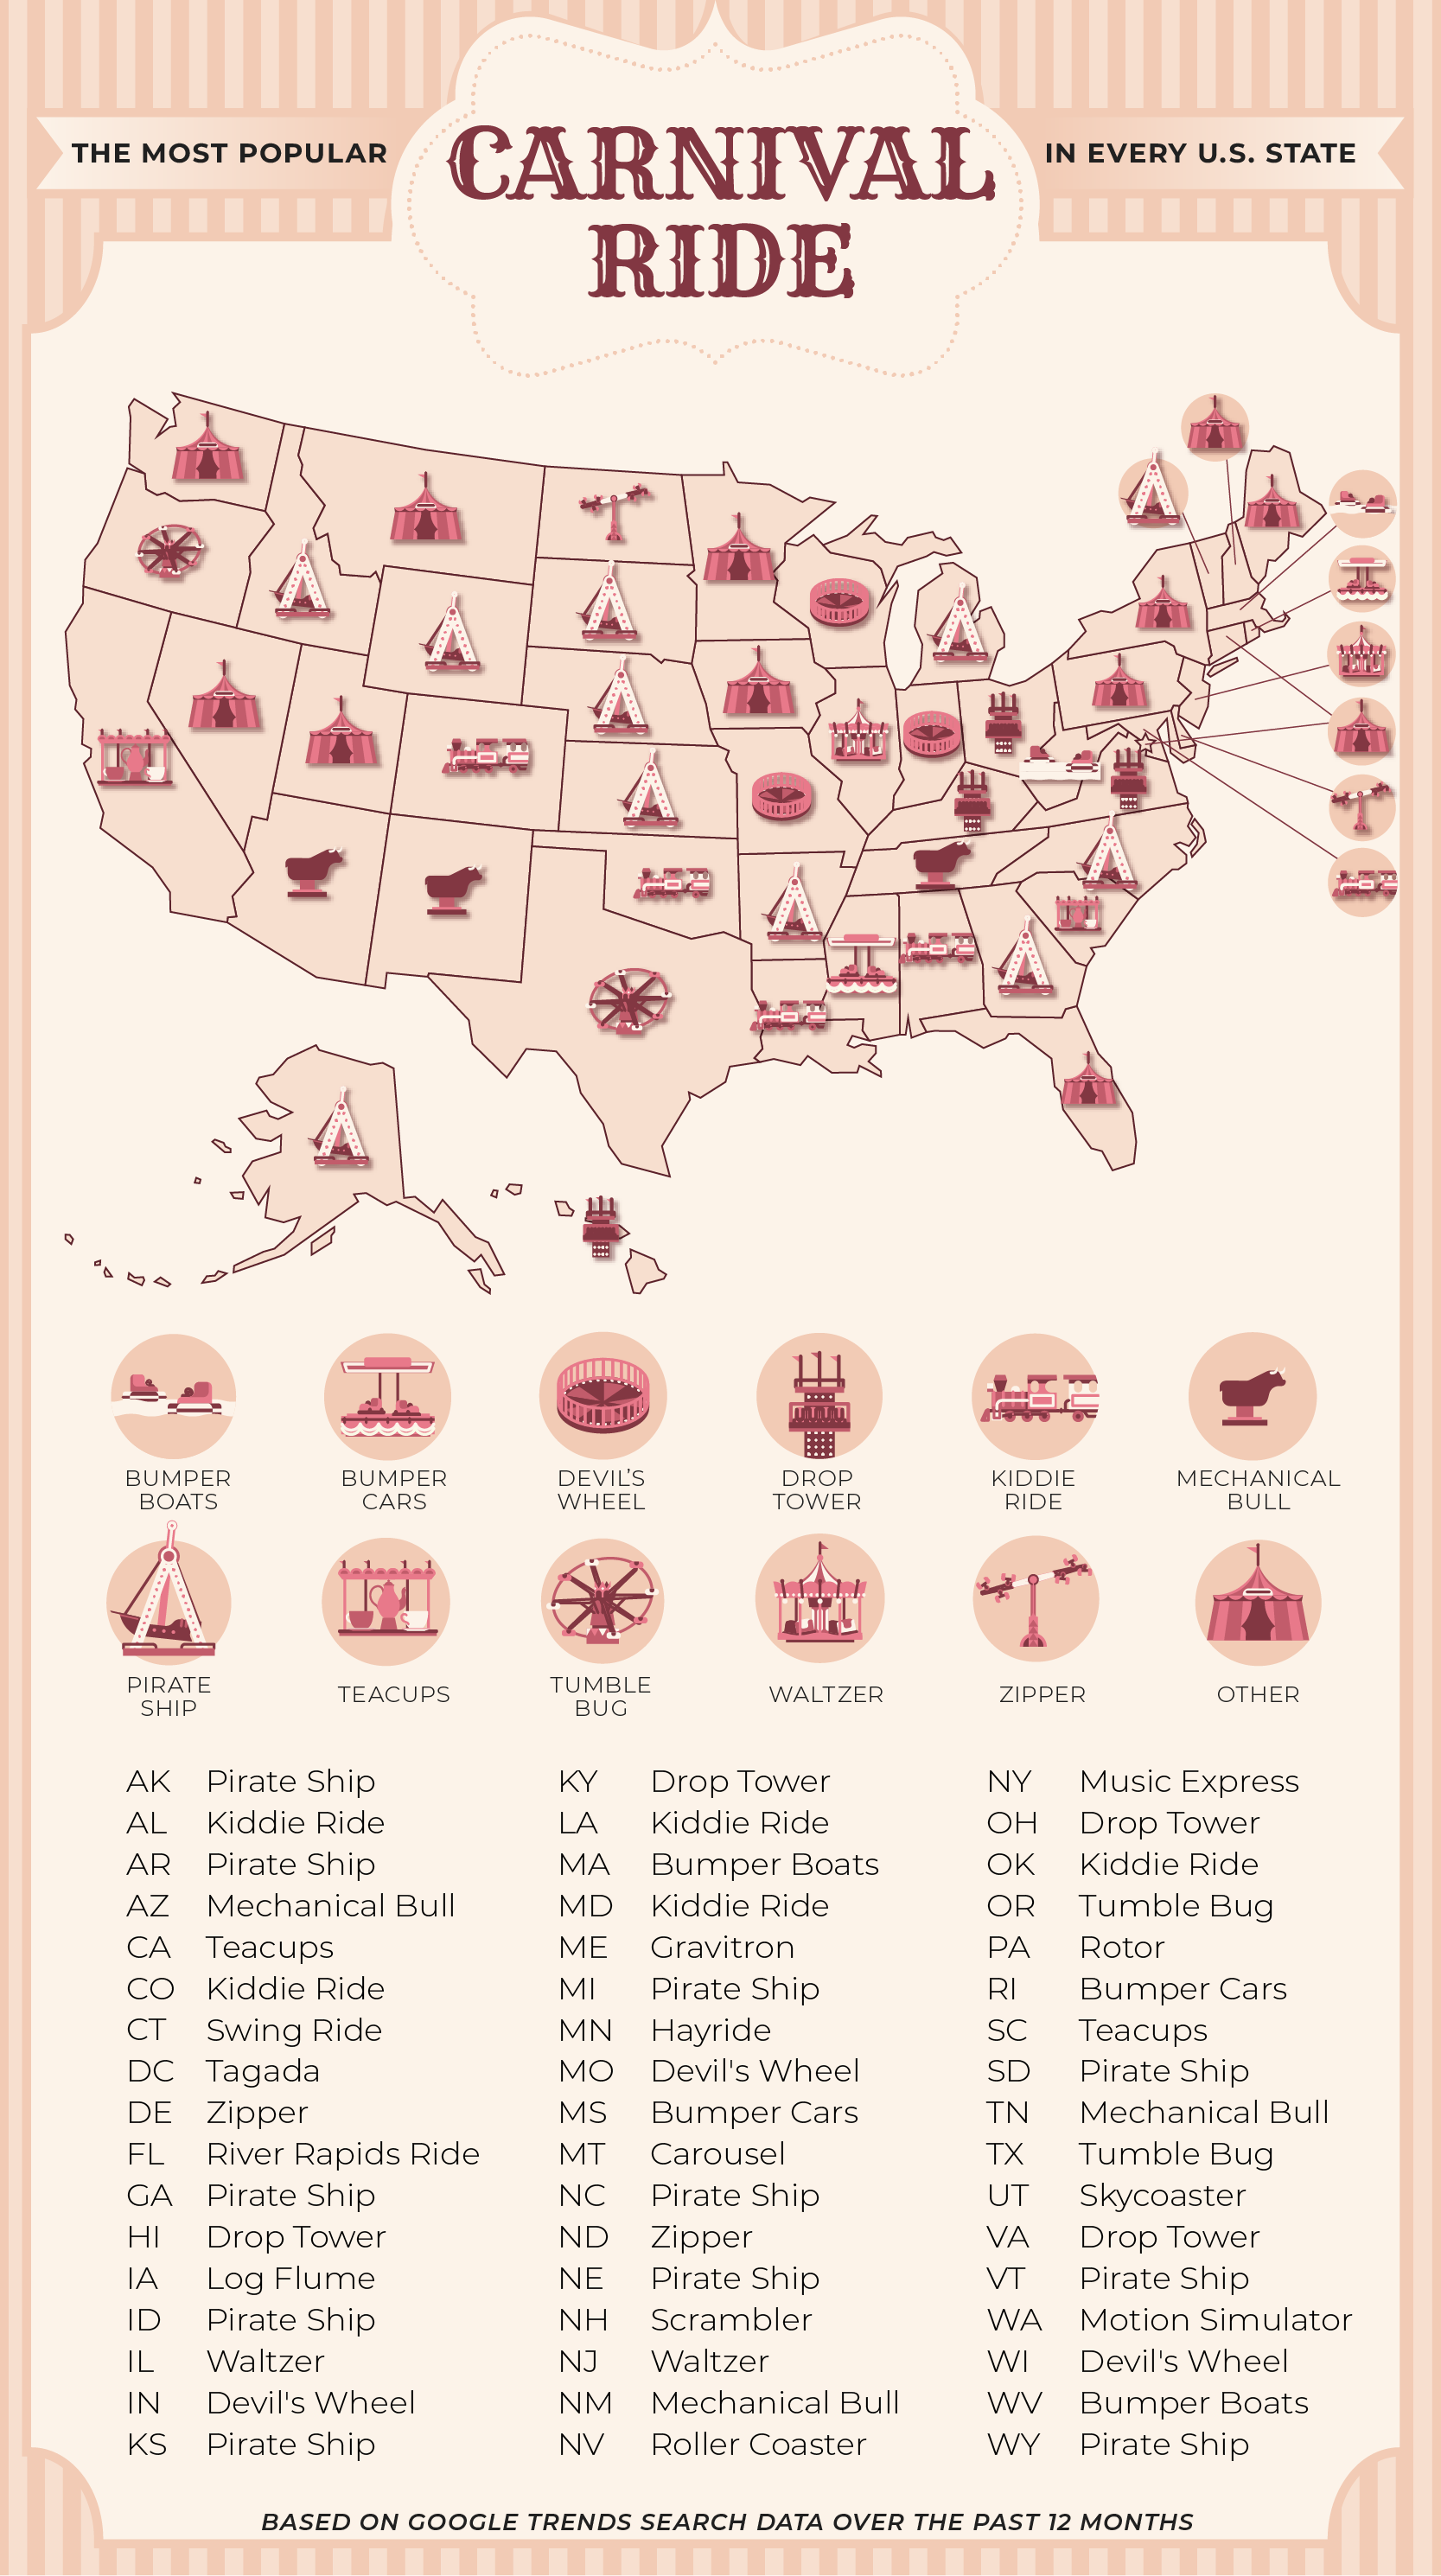 A U.S. map showing the most popular carnival ride in every state